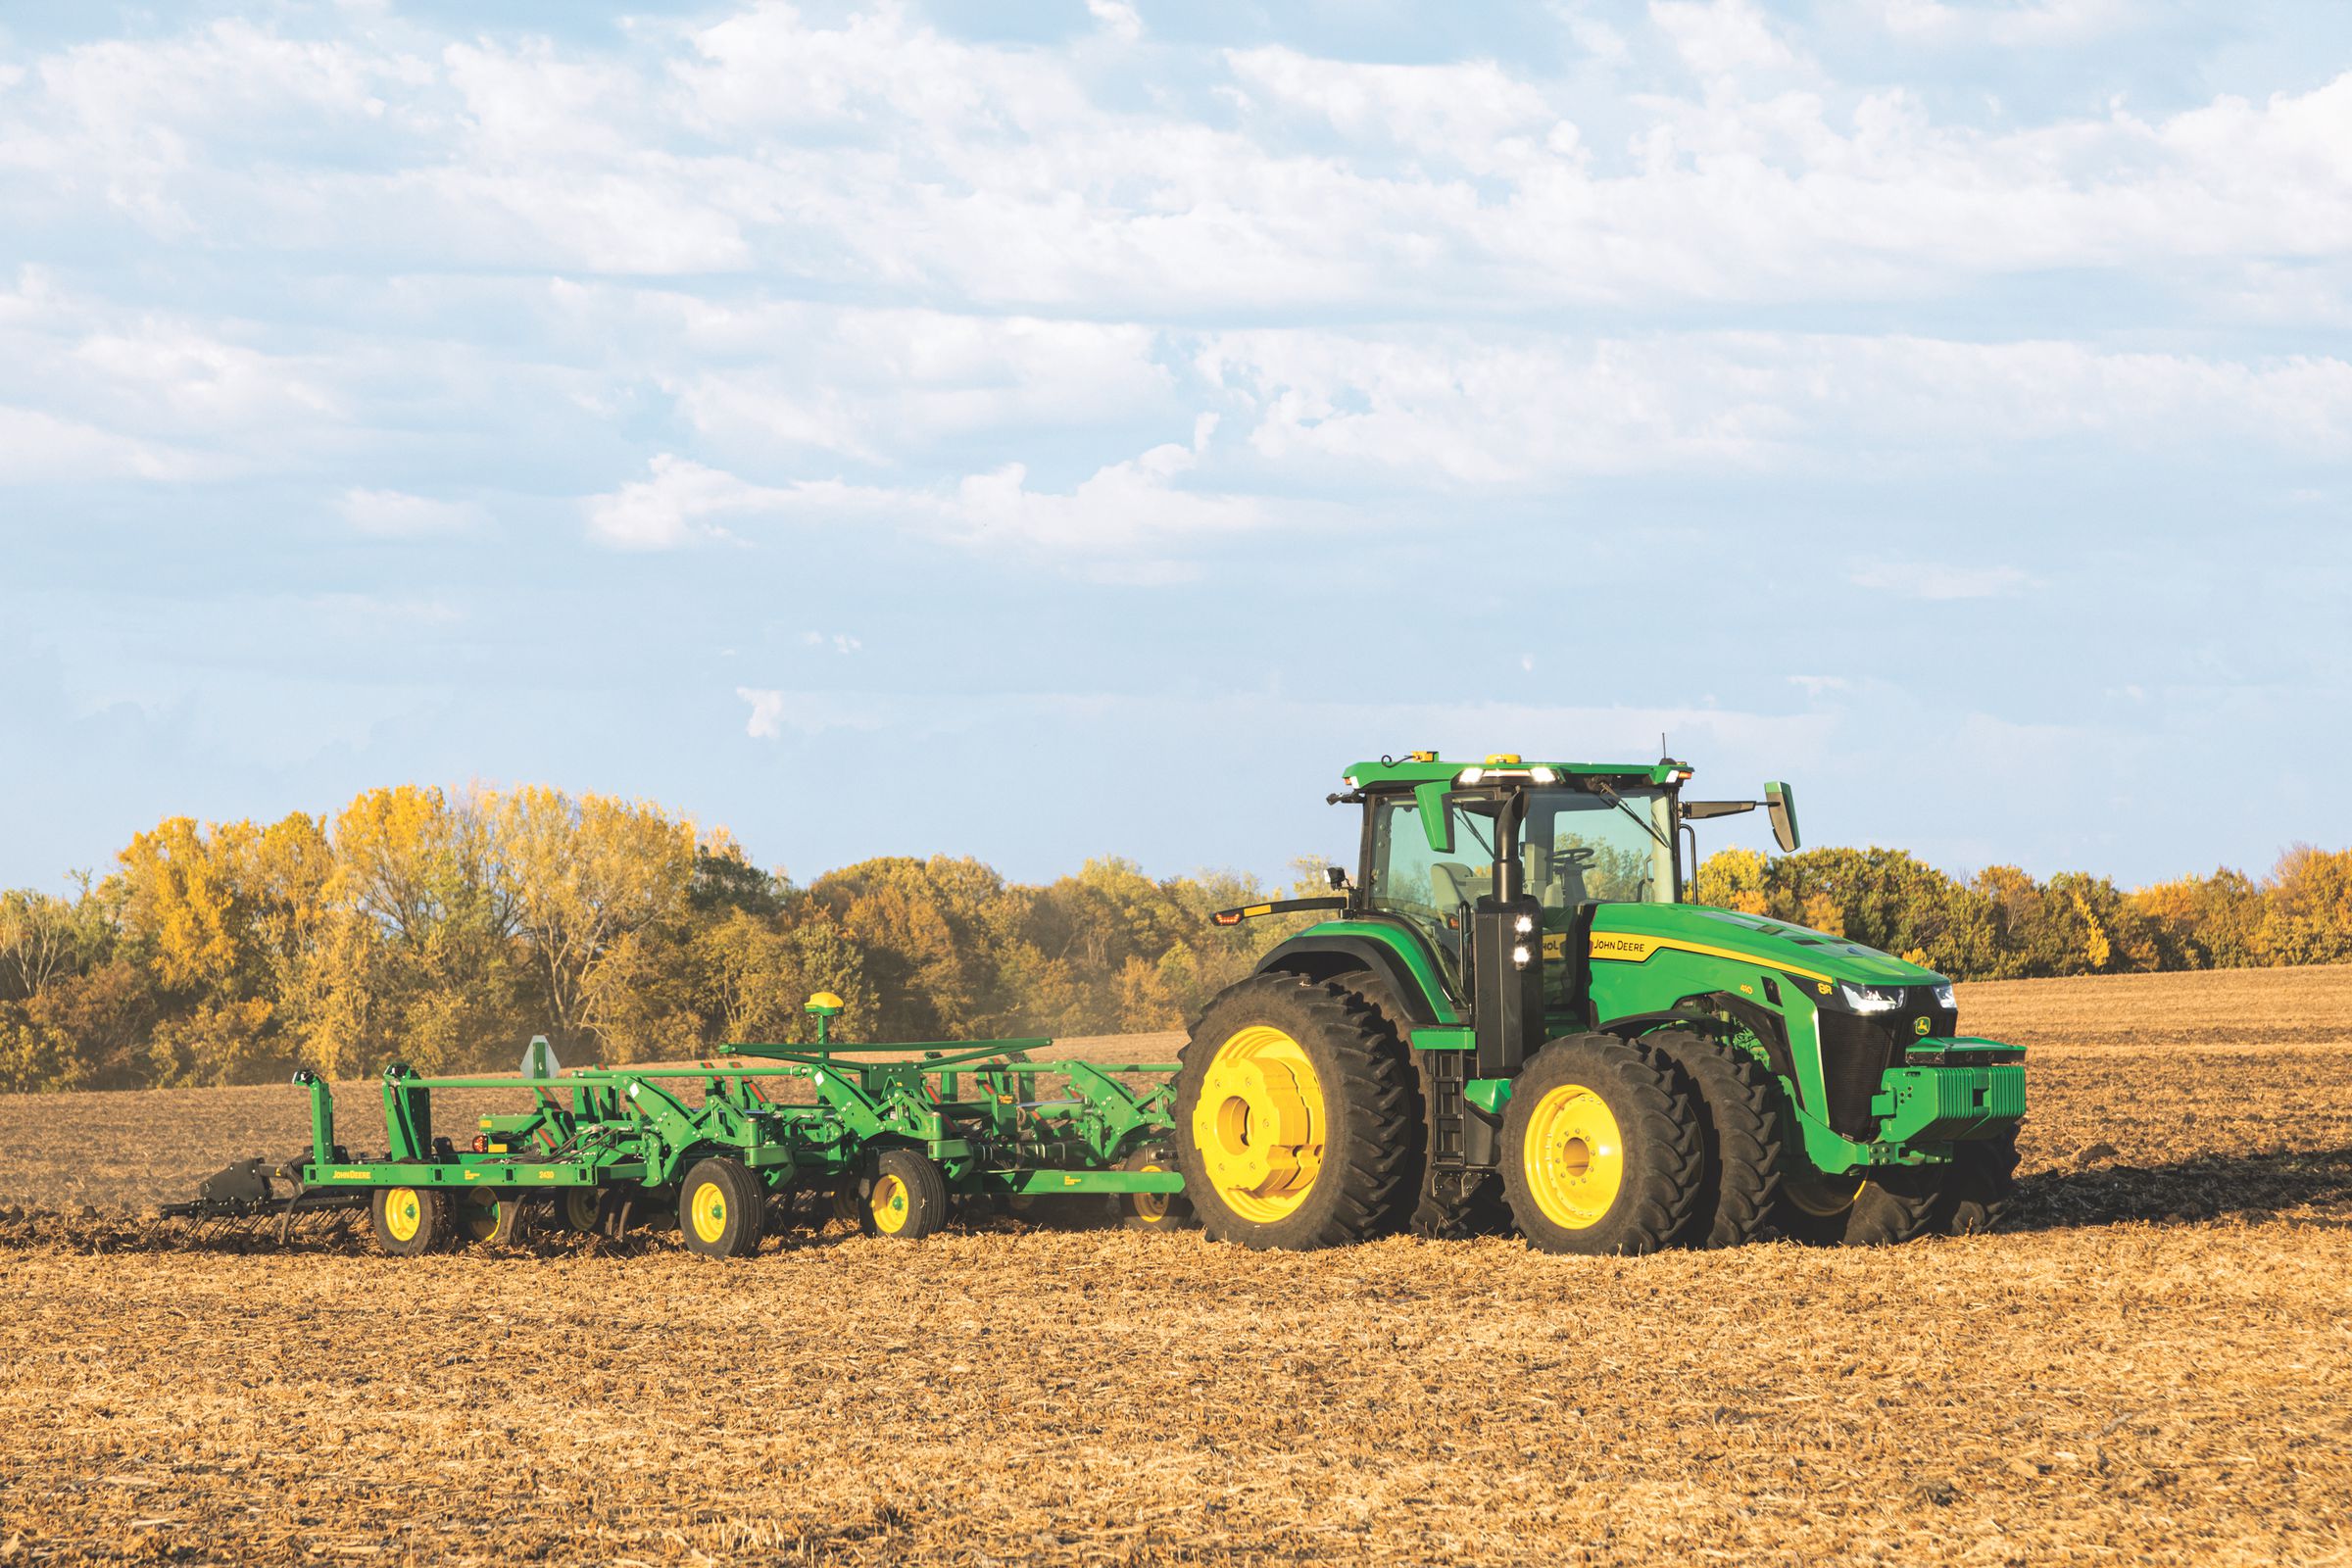 Agricultural automation has been improving slowly but surely over the past decades. 